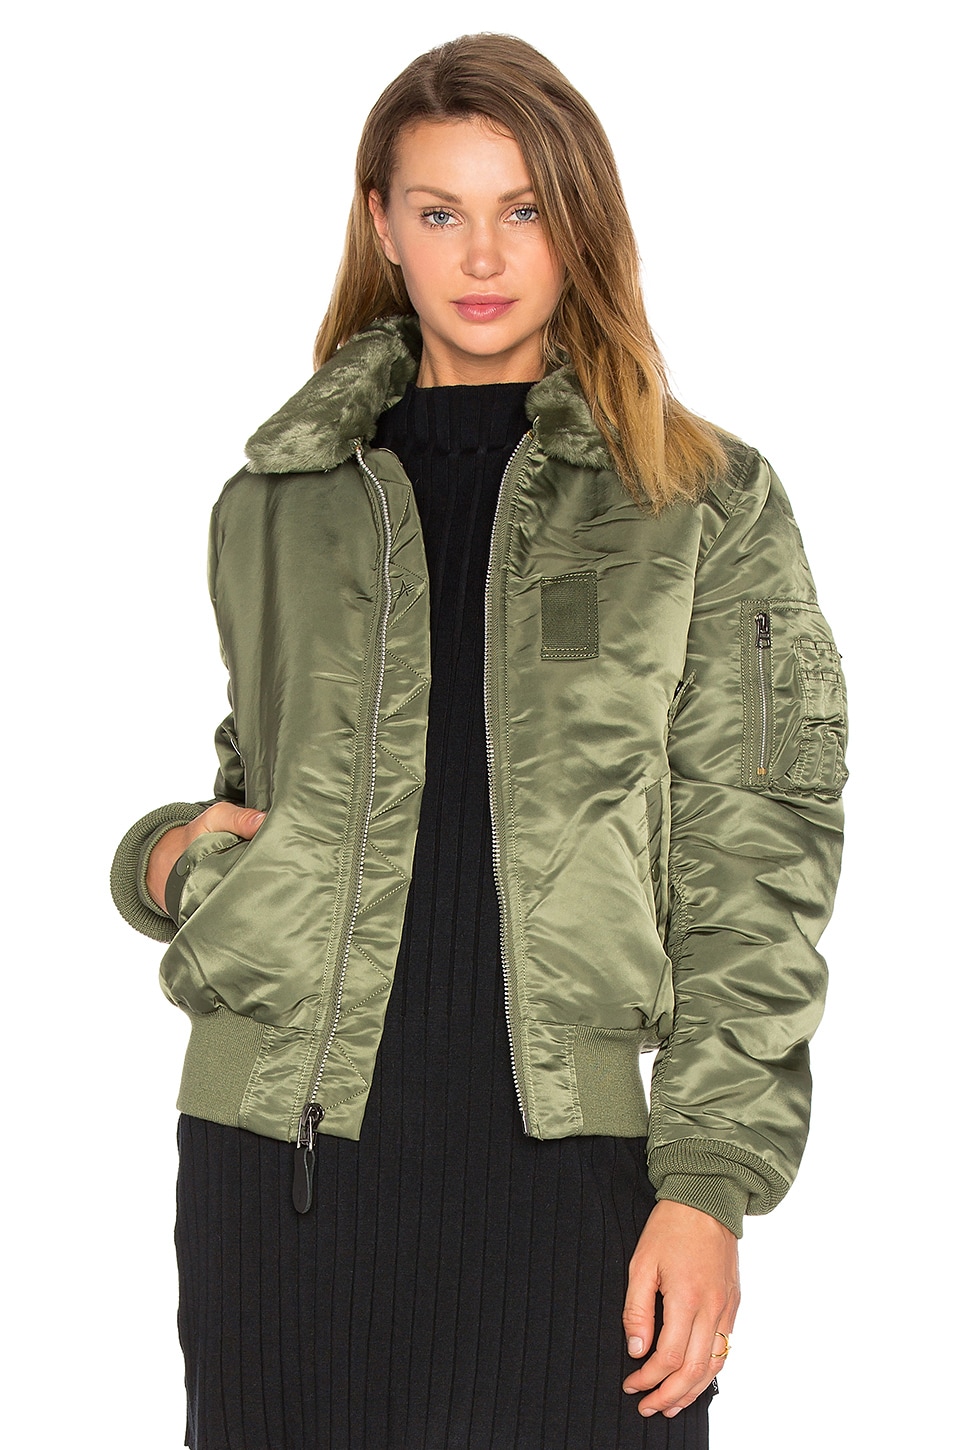 ALPHA INDUSTRIES B-15 Slim Fit Bomber with Faux Fur Collar in Sage ...